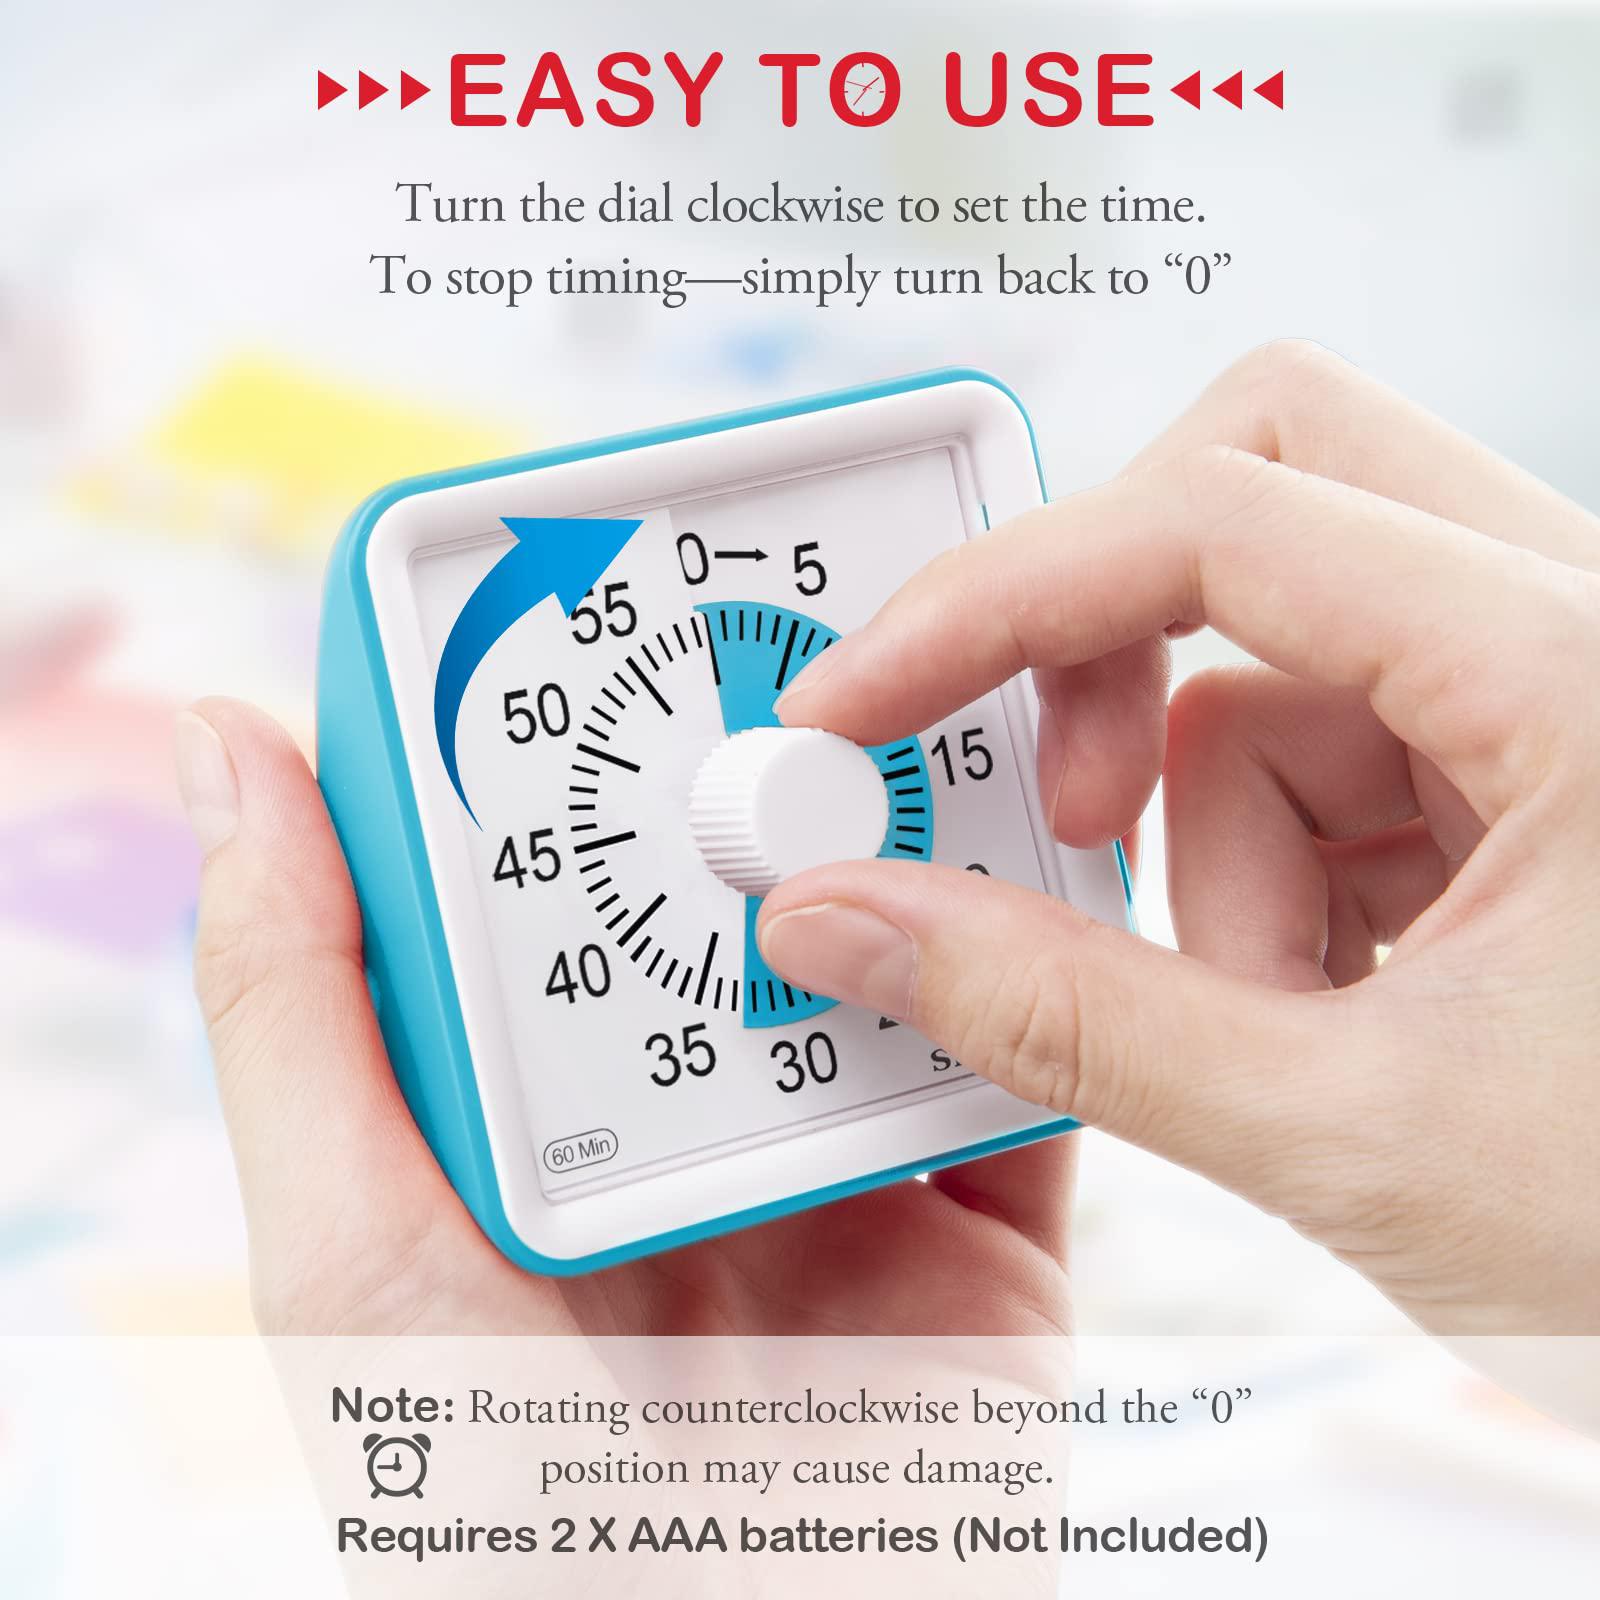 secura 60-minute visual timer, classroom classroom timer, countdown timer for kids and adults, time management tool for teach